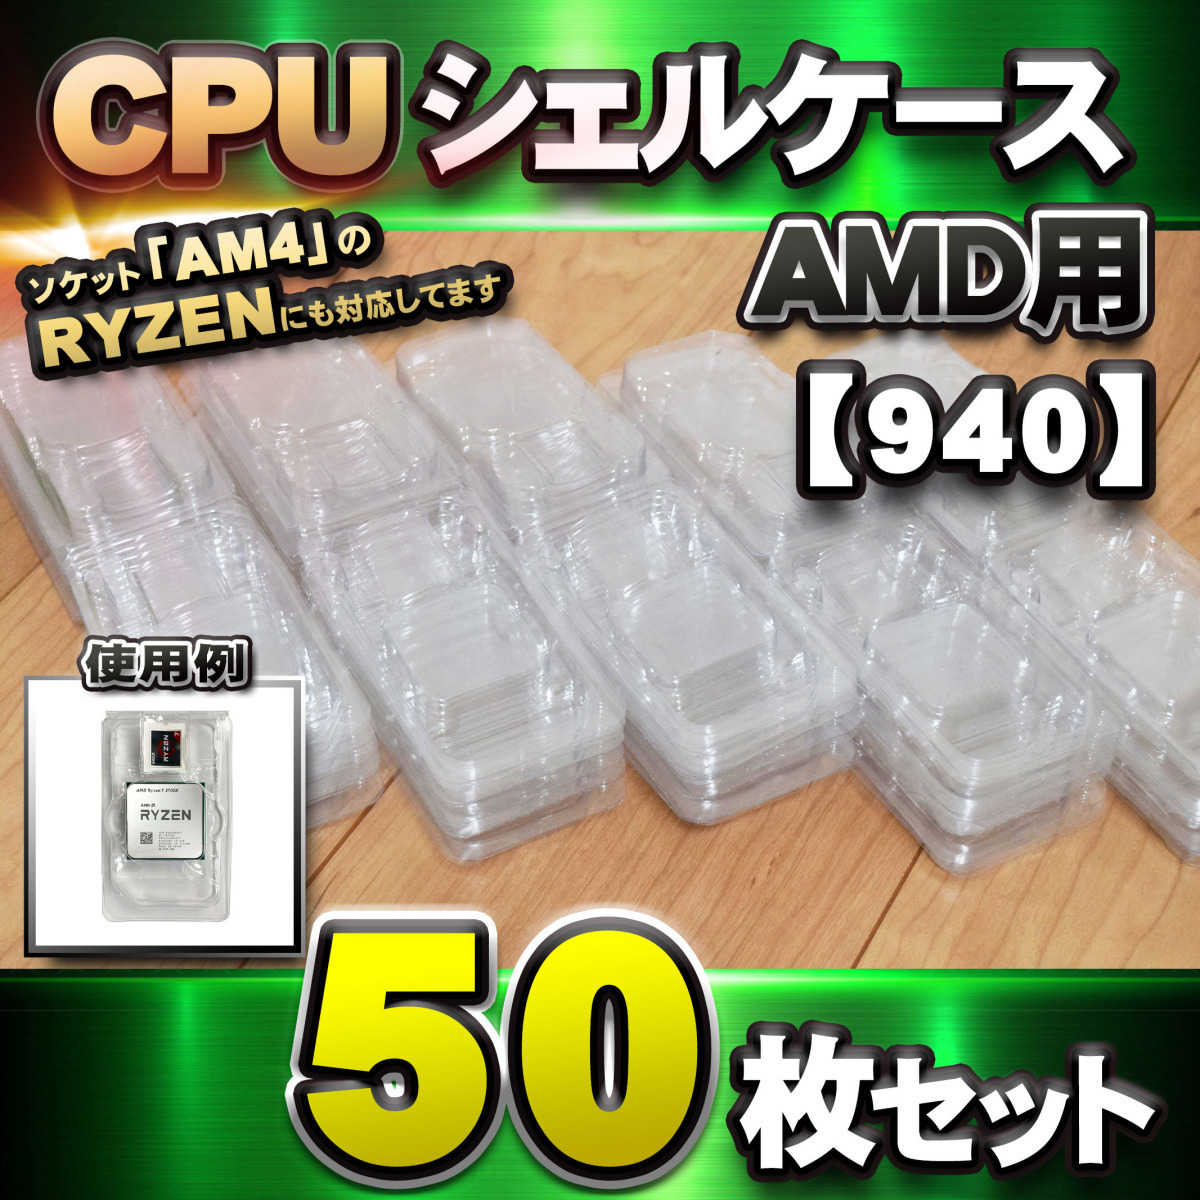 [ 939 correspondence ]CPU shell case AMD for plastic [AM4. RYZEN also correspondence ] storage storage case 50 pieces set 